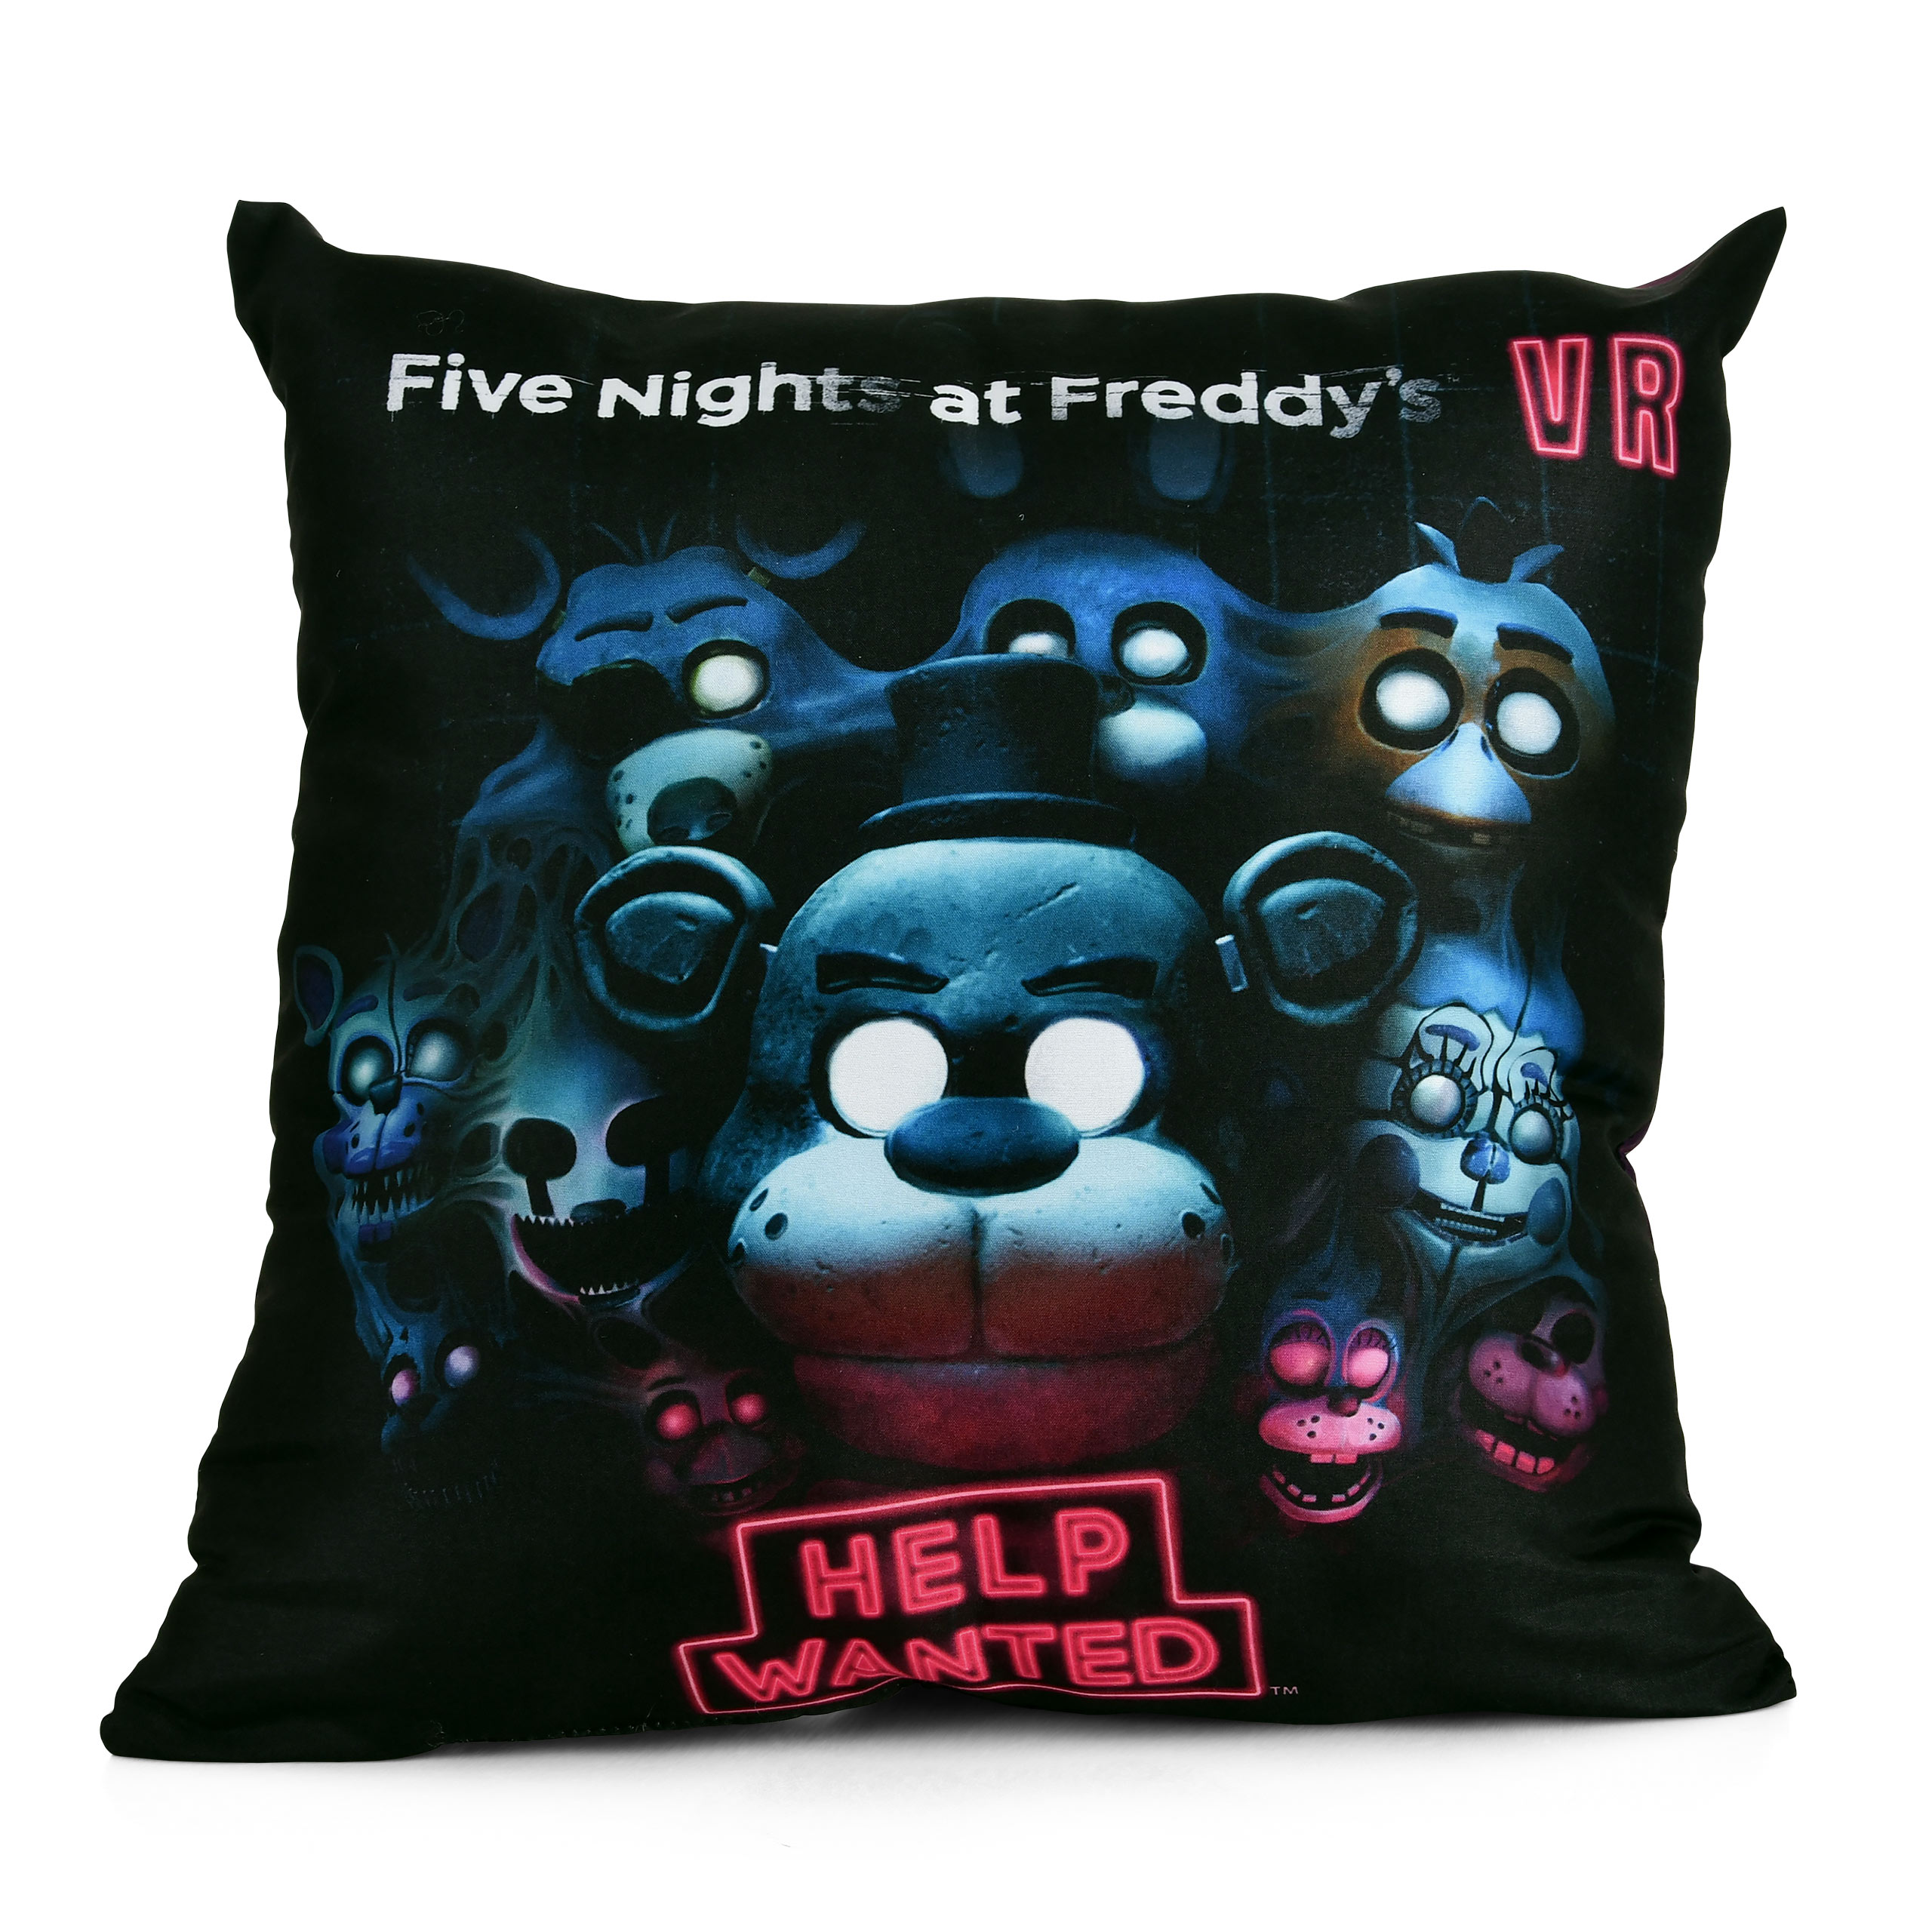 Five Nights at Freddy's - Help Wanted Pillow